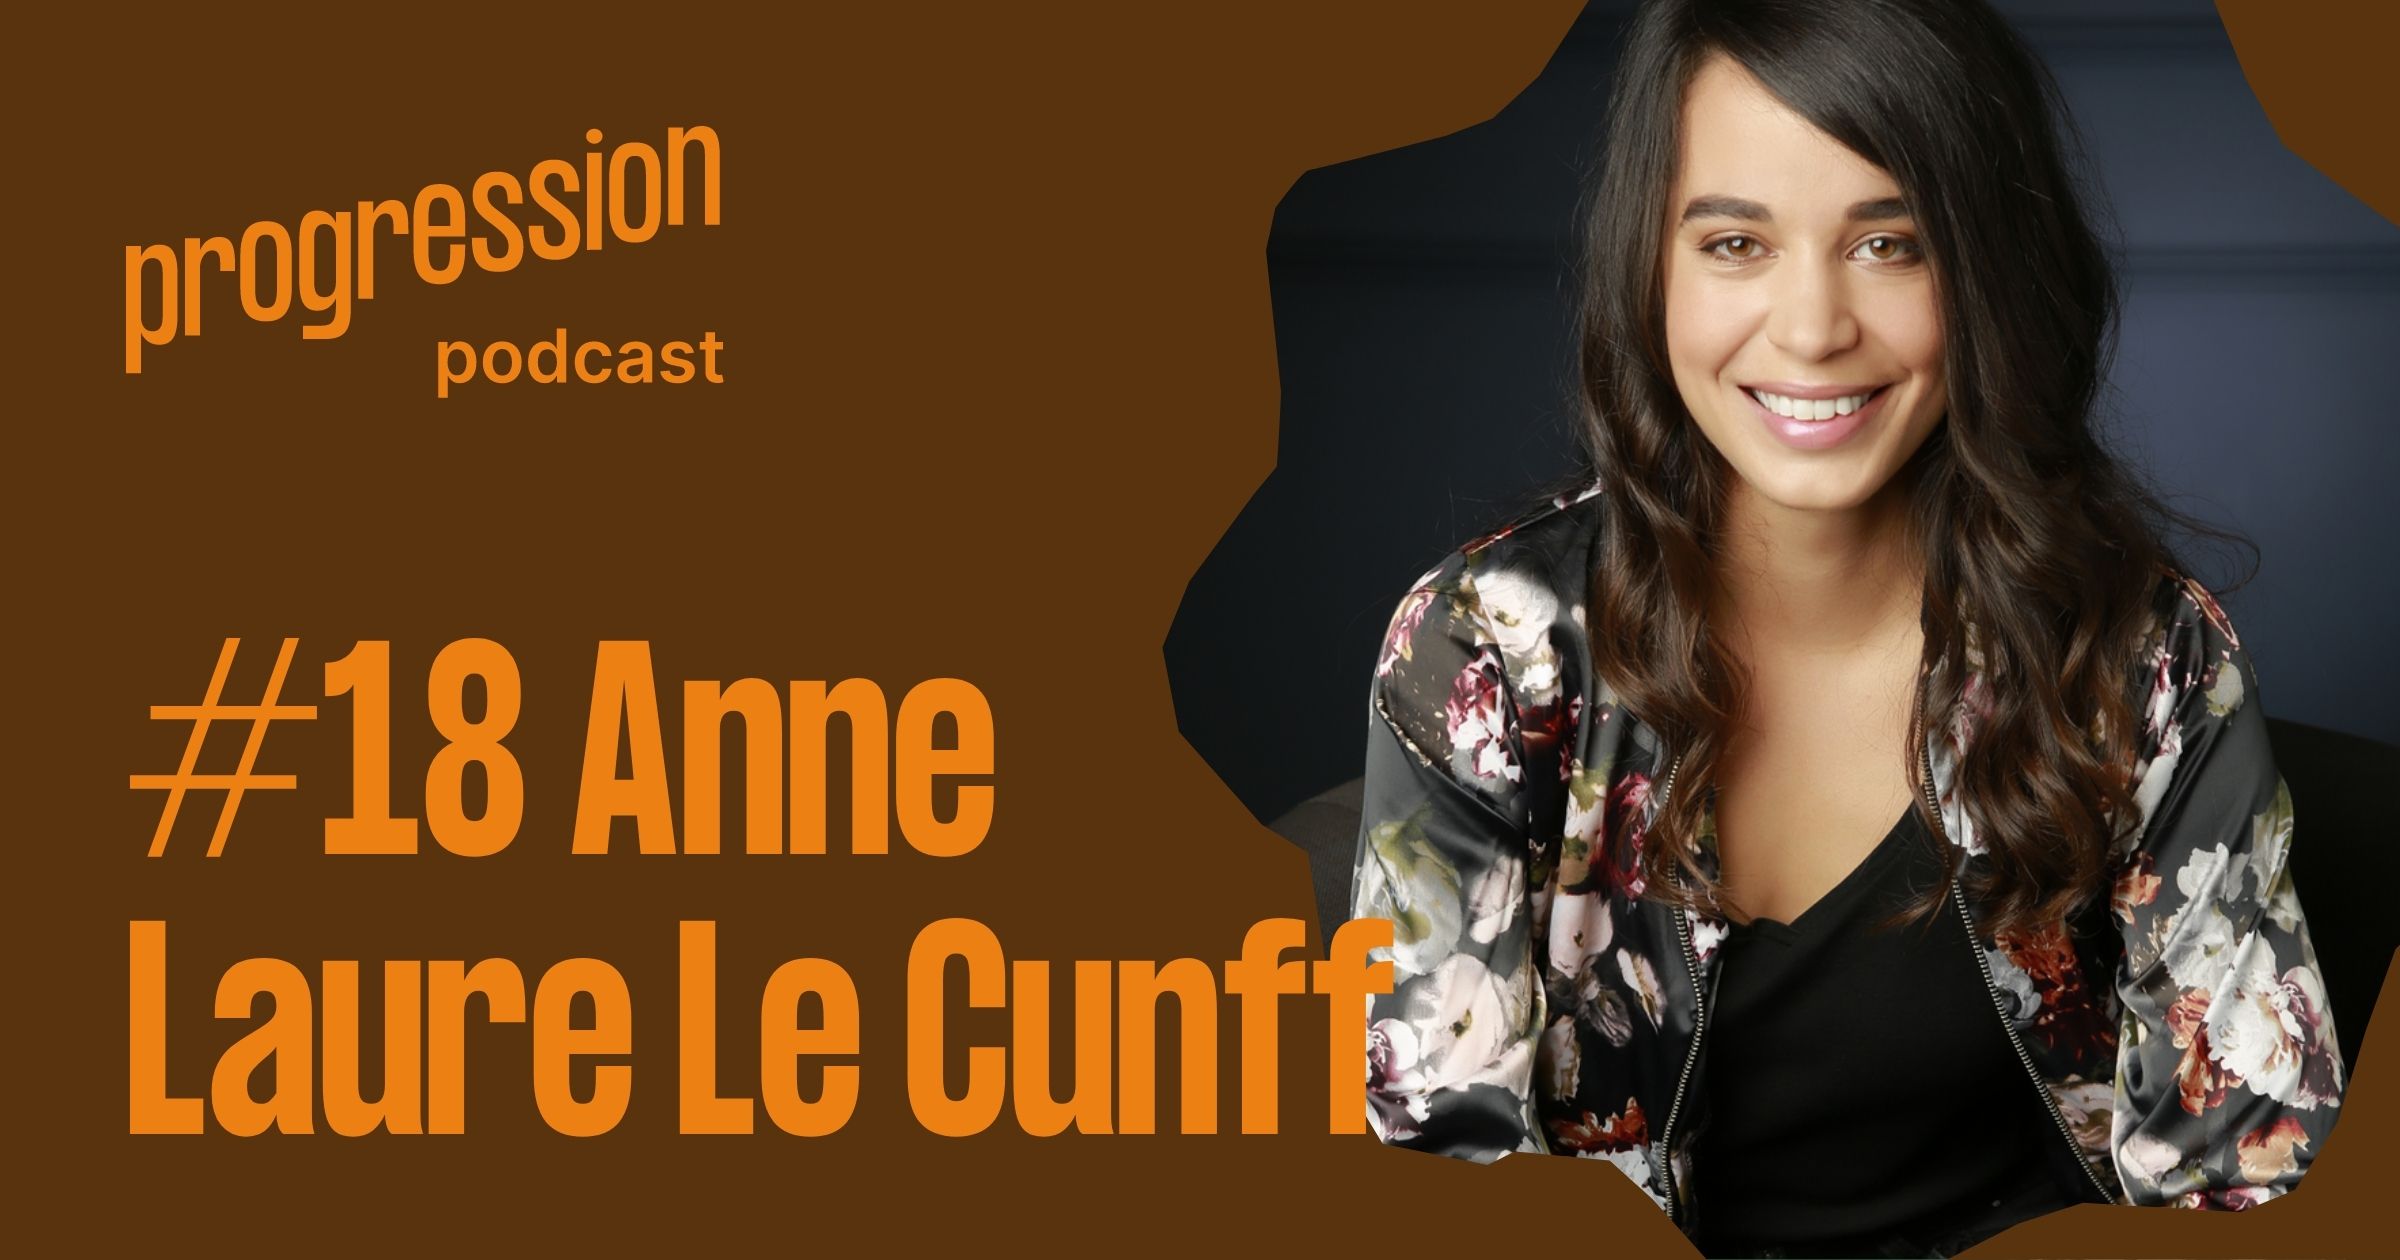 Podcast #18: Anne-Laure Le Cunff on mindfulness, burnout, writing every day and building a business